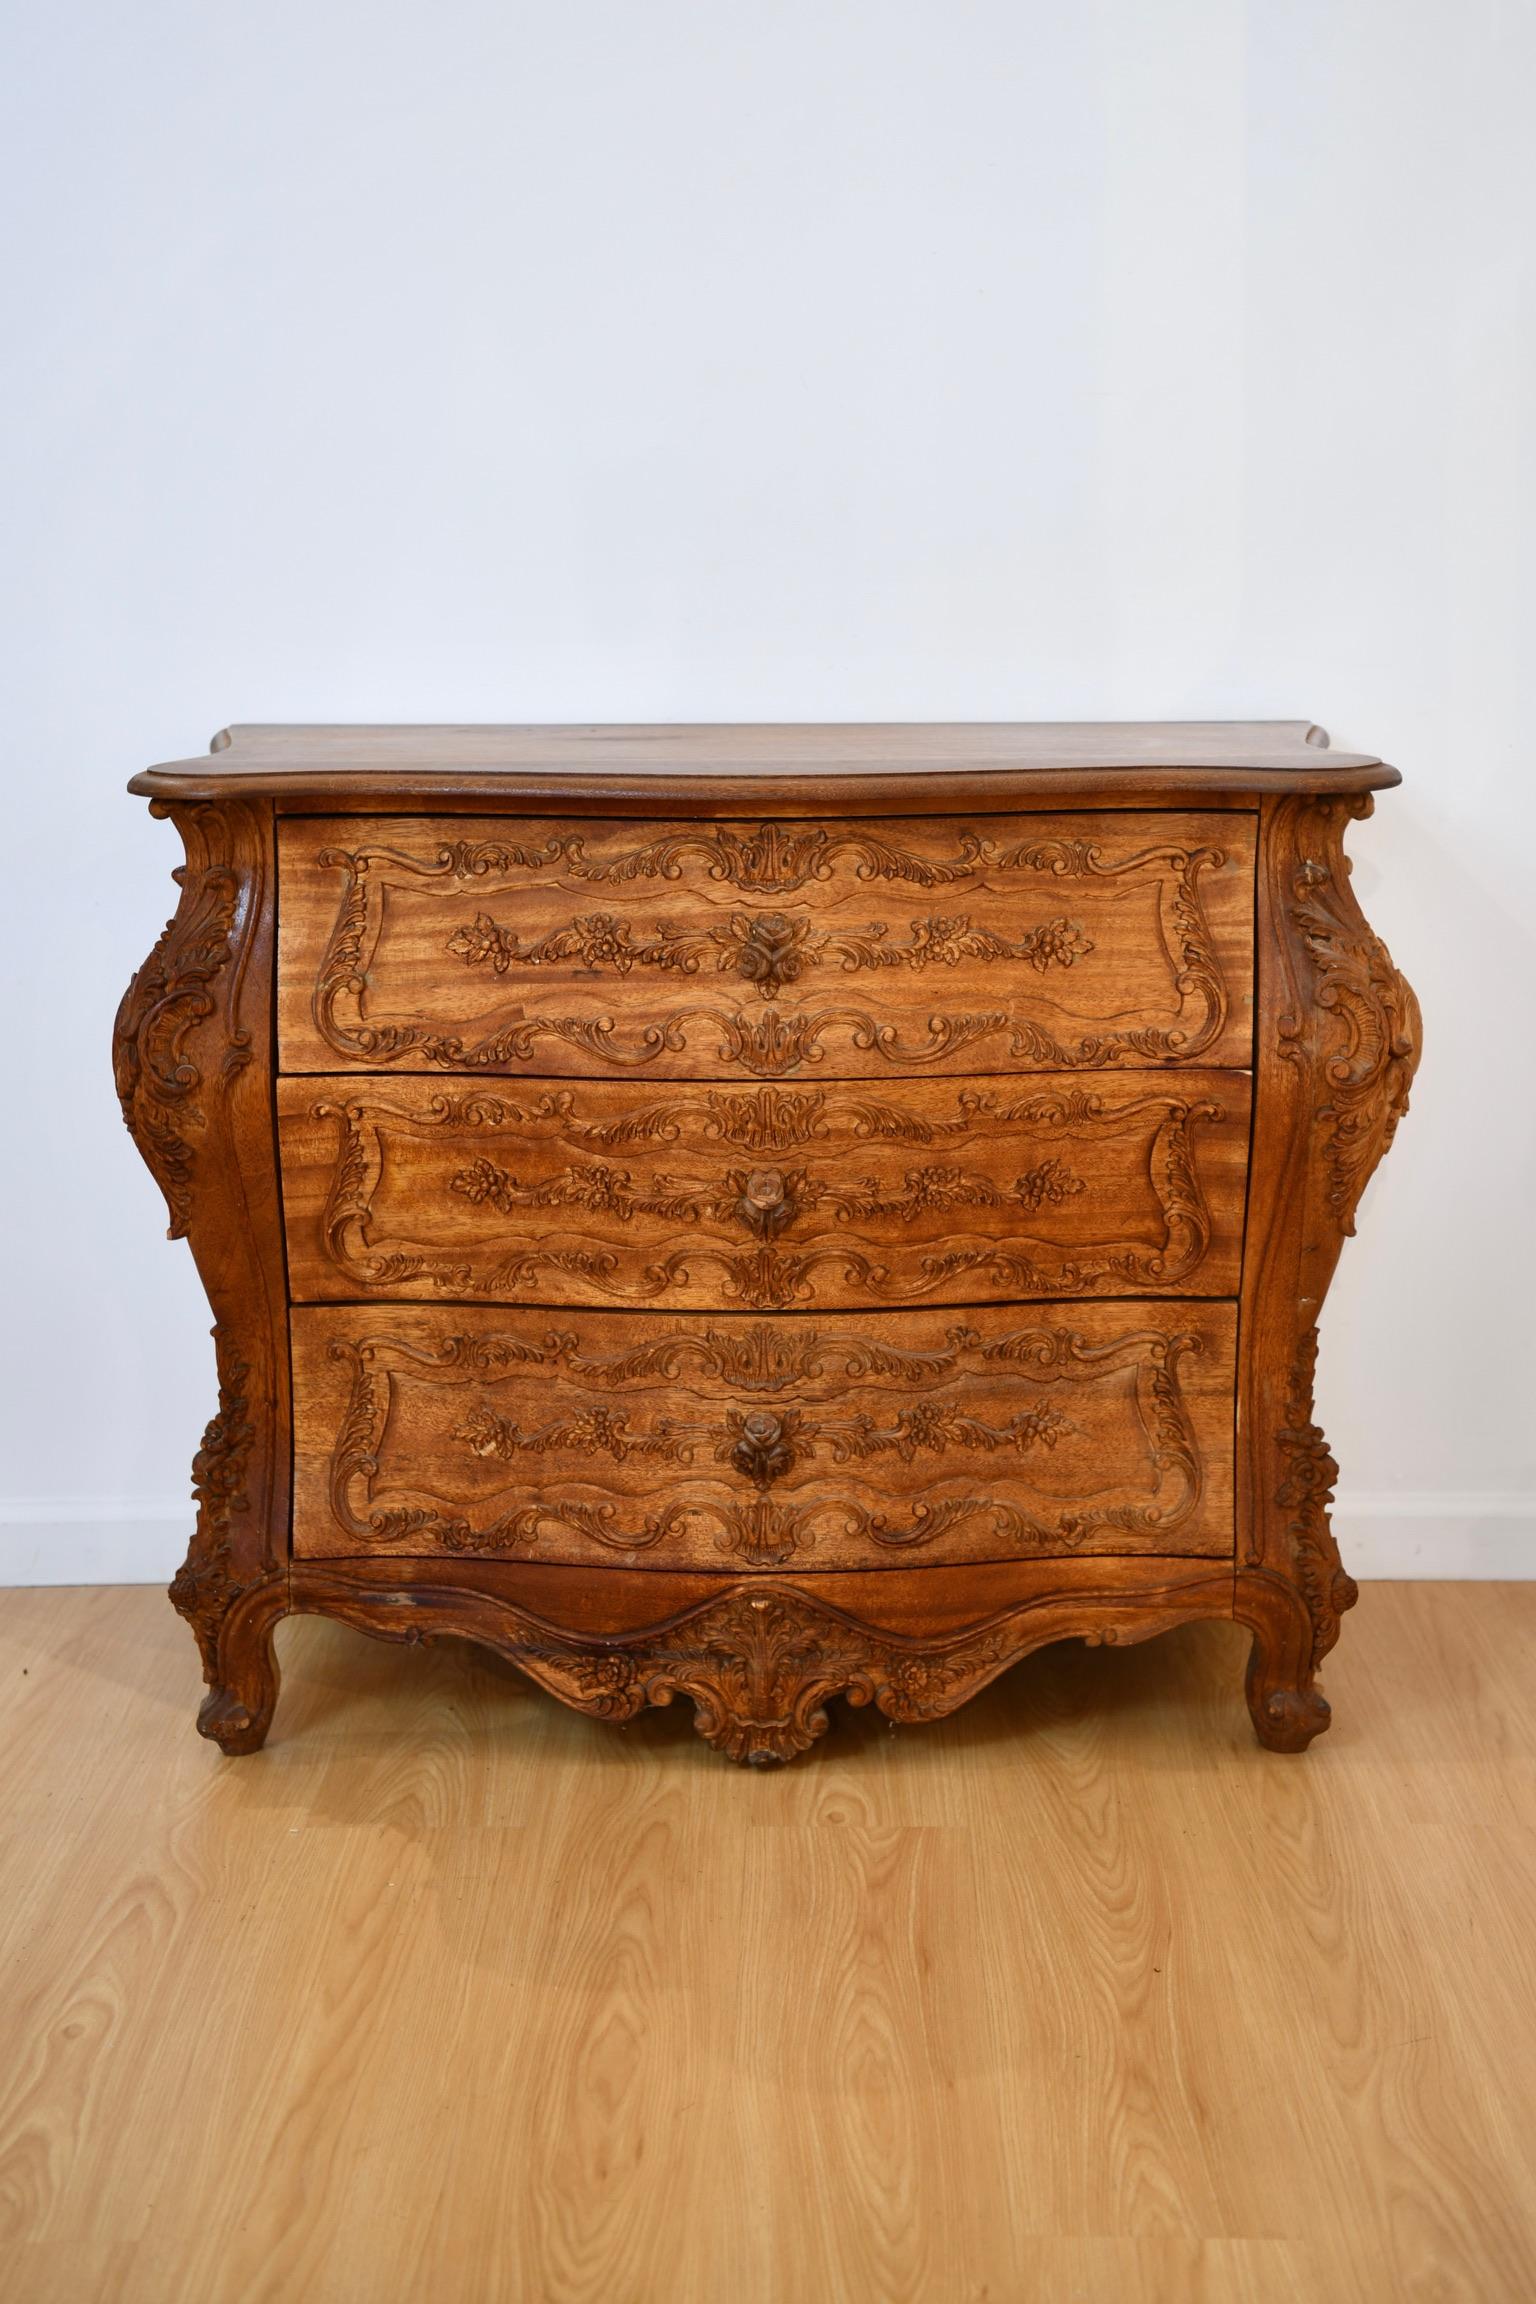 Continental rococo style heavily carved exotic hardwood bombe chest of drawers, circa mid to late 20th century. Dimensions: 34